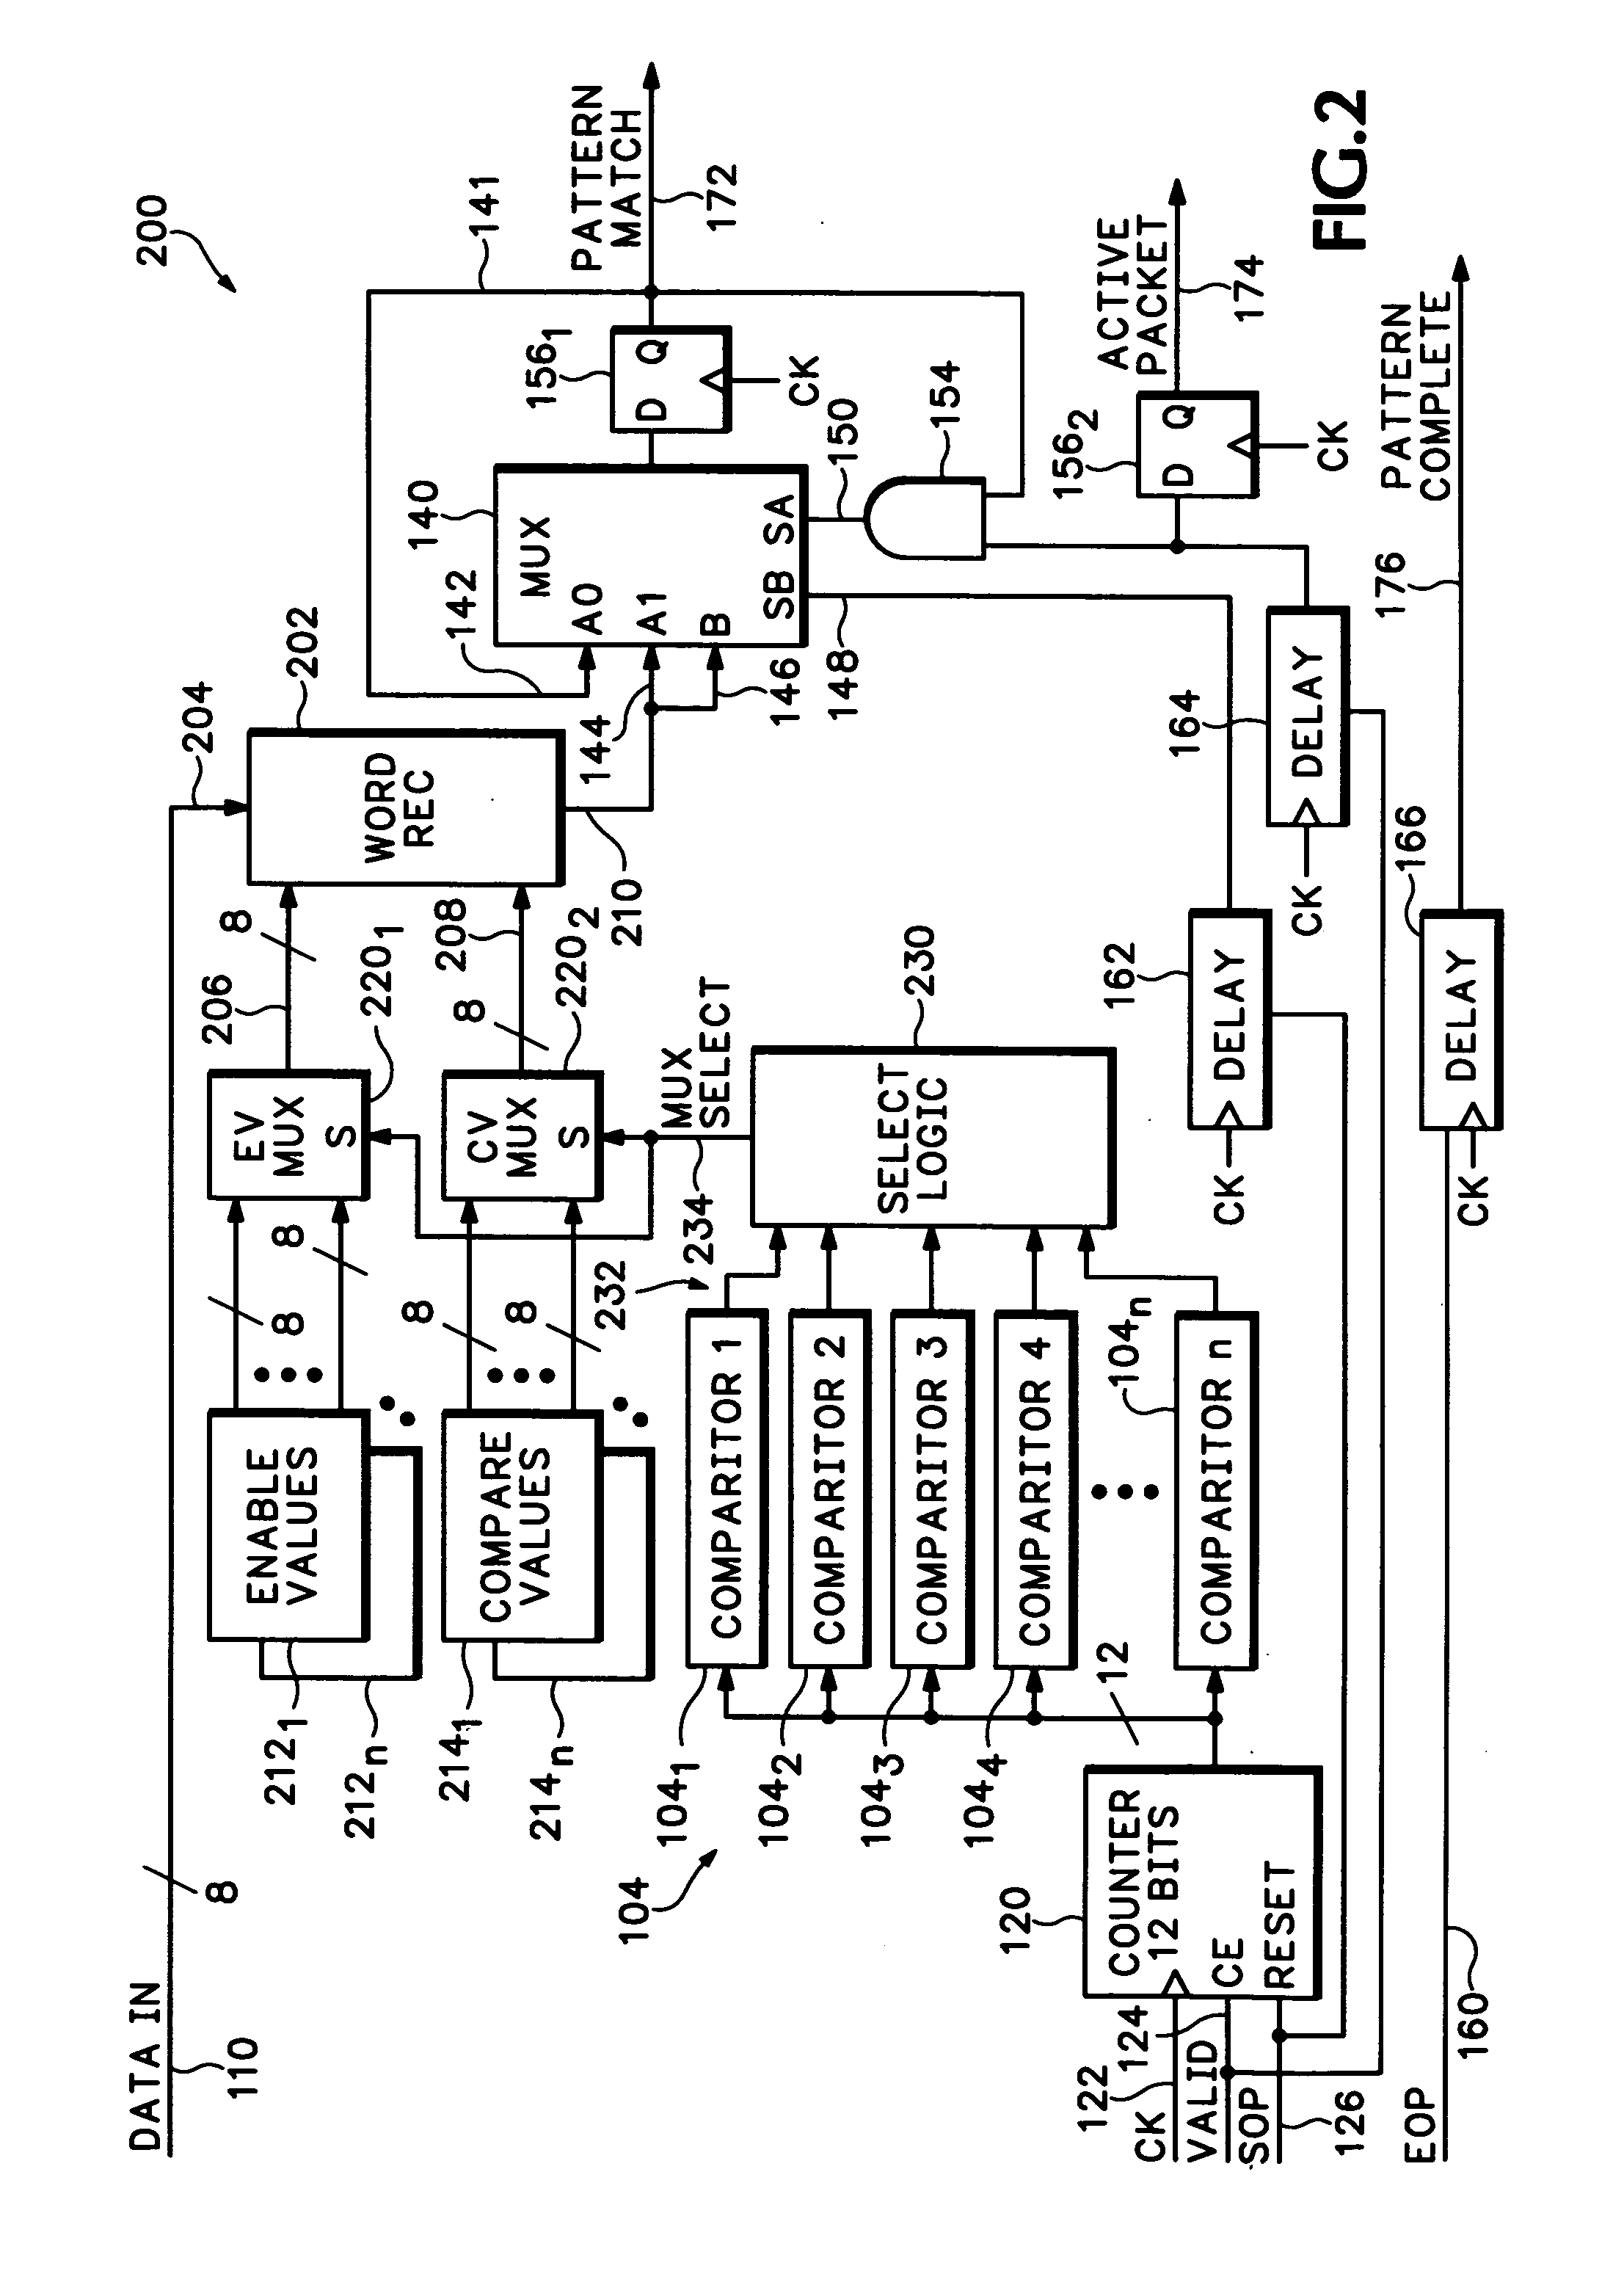 Apparatus and method of analyzing packetized data spanning over multiple clock cycles